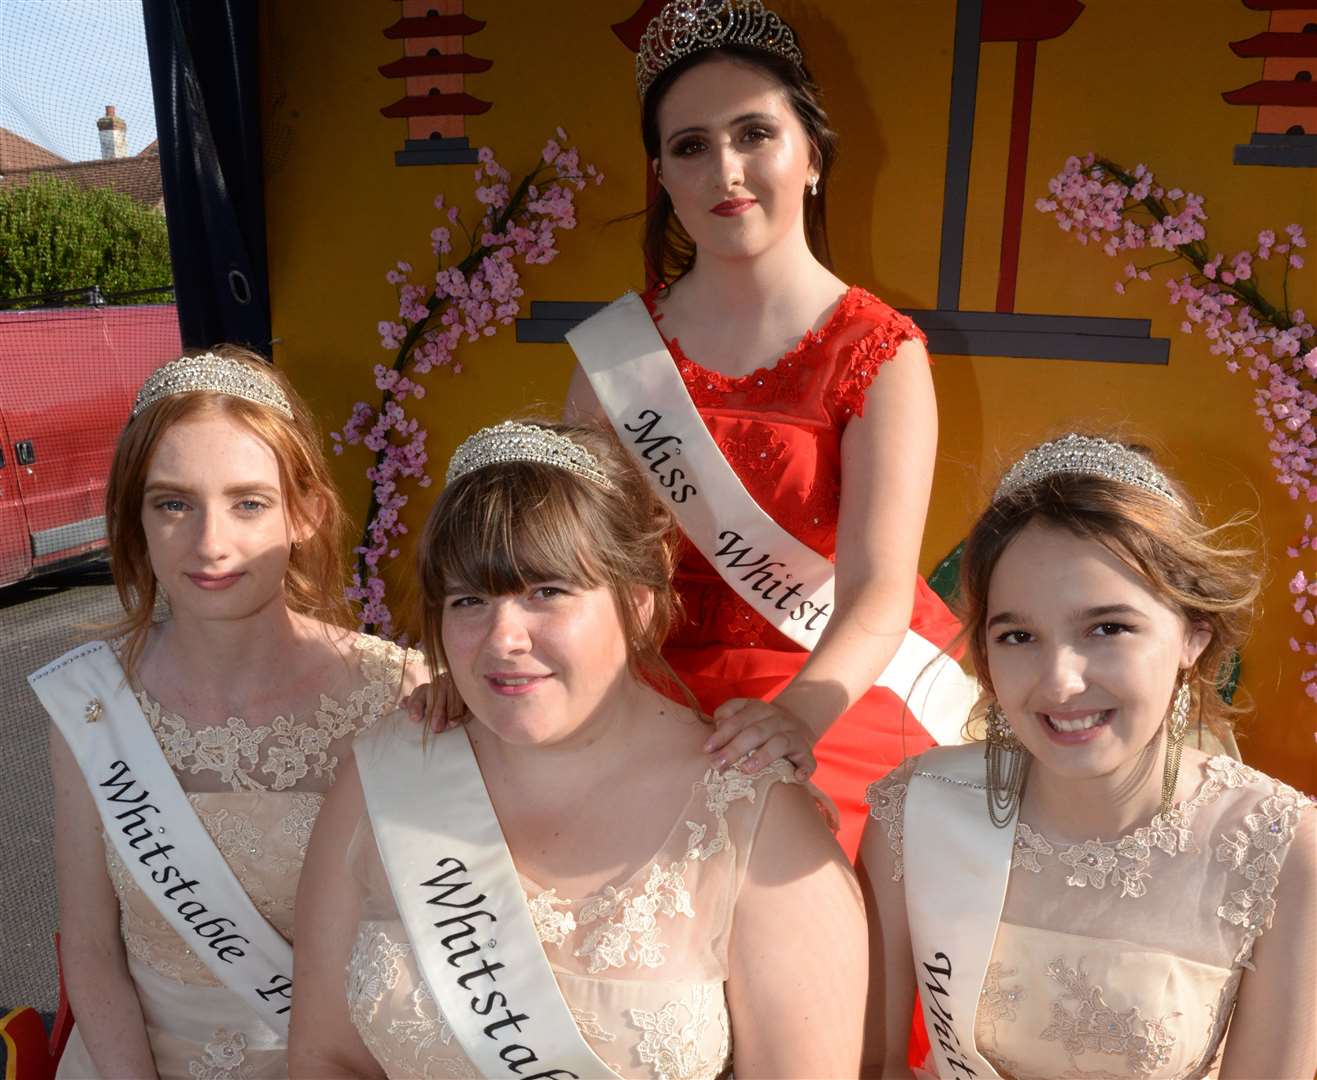 Former Miss Whitstable Jade Rafferty and her court of Lucy White, Tilly Russell and Nikita Kemp at the 2018 Whitstable Carnival